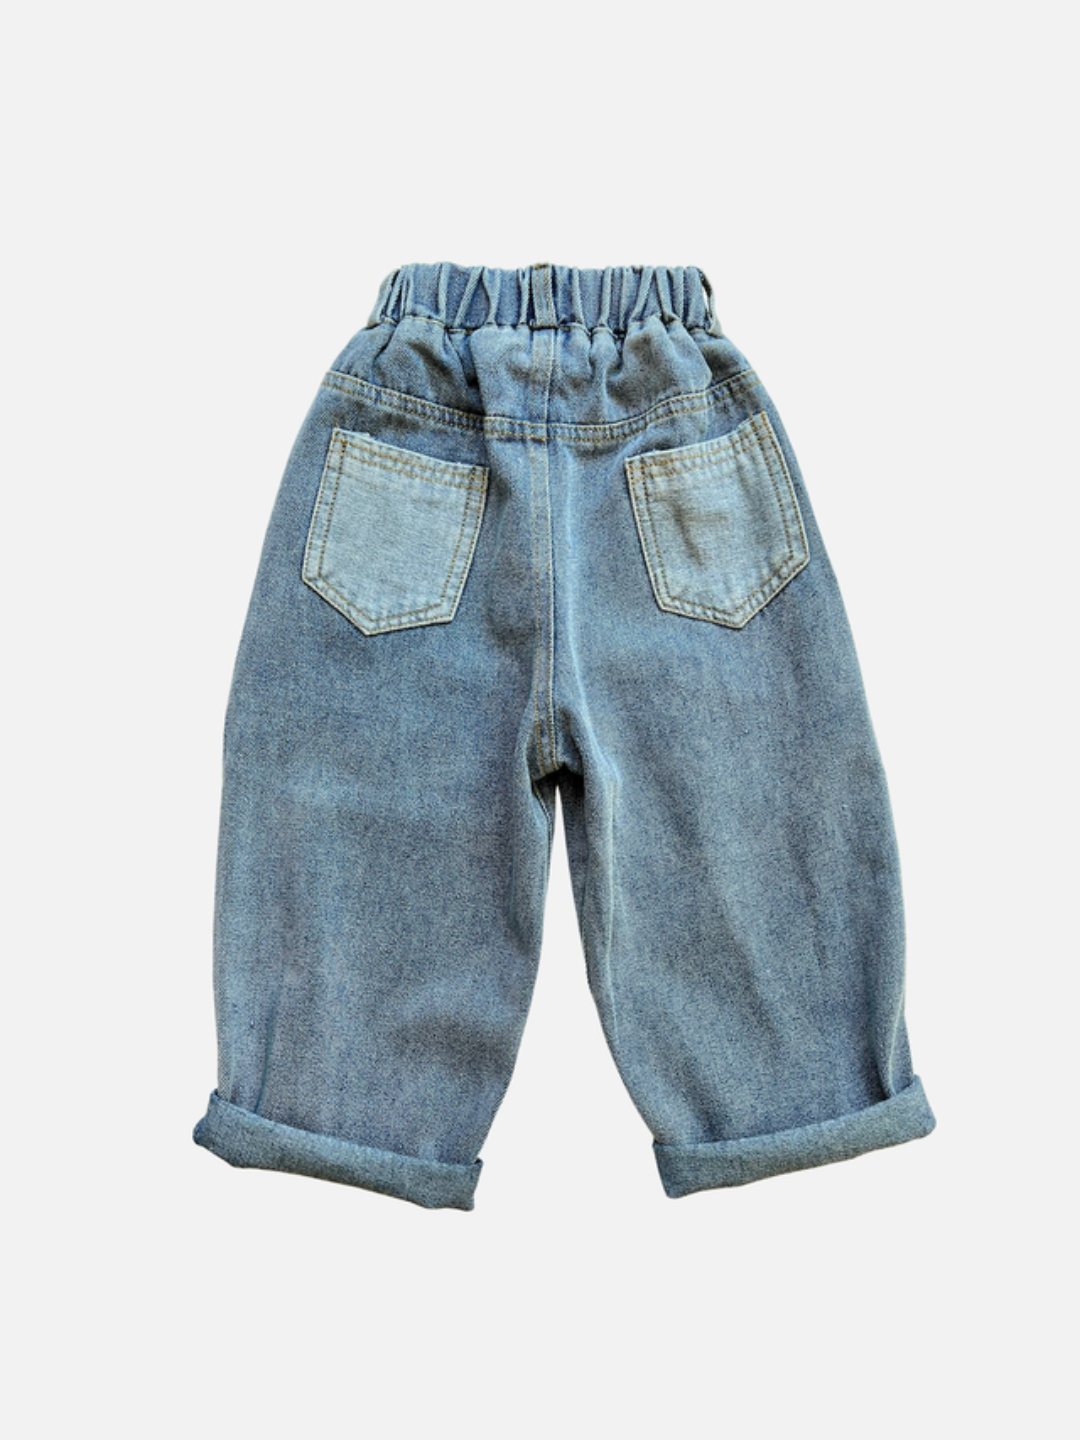 A pair of kids' jeans in mid blue denim with two lighter blue pockets, back view